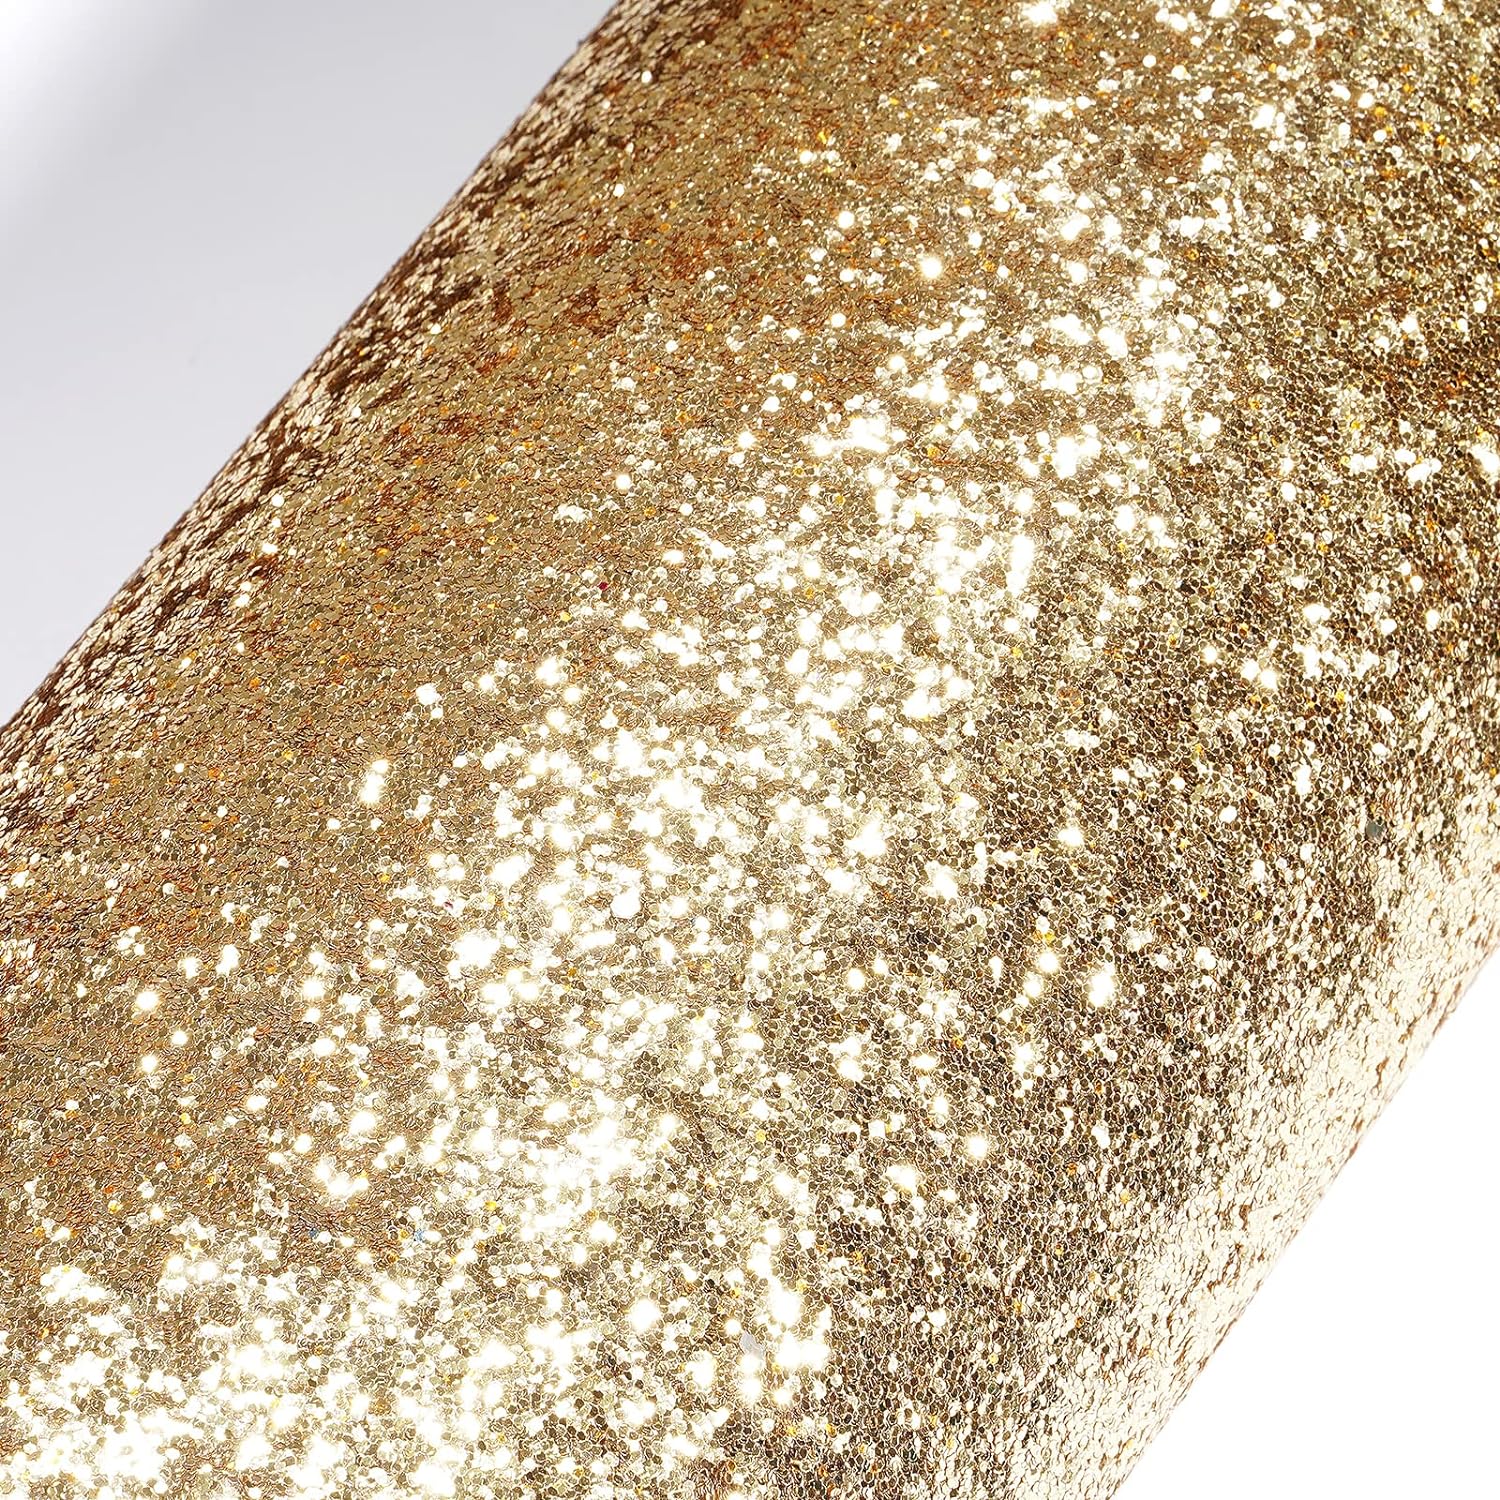 Stickyart Glitter Wallpaper Stick and Peel Champagne Gold Glitter Contact Paper Sequins Sparkle Wallpaper for Bedroom Accent Wall Birthday Party Christmas Decorations DIY Removable 15.8x78.7